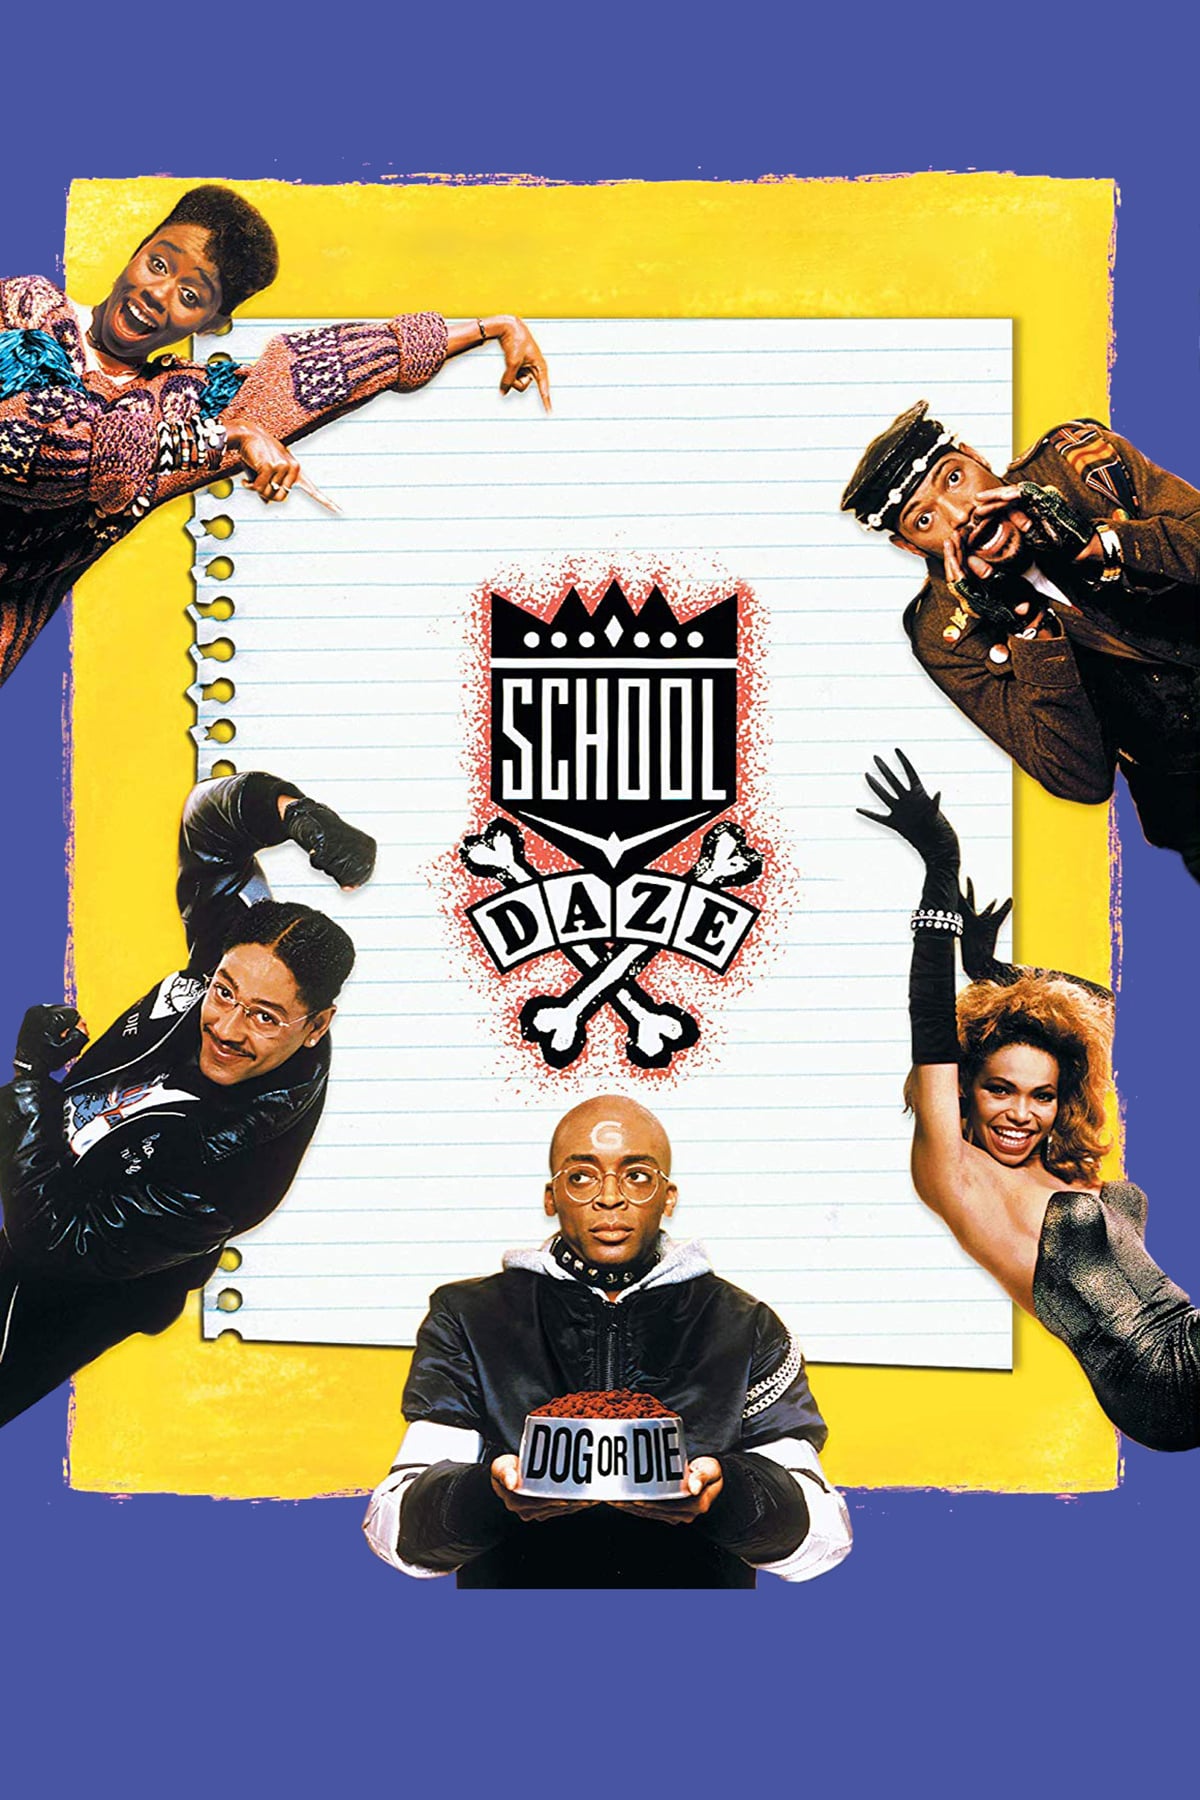 Poster for the movie "School Daze"